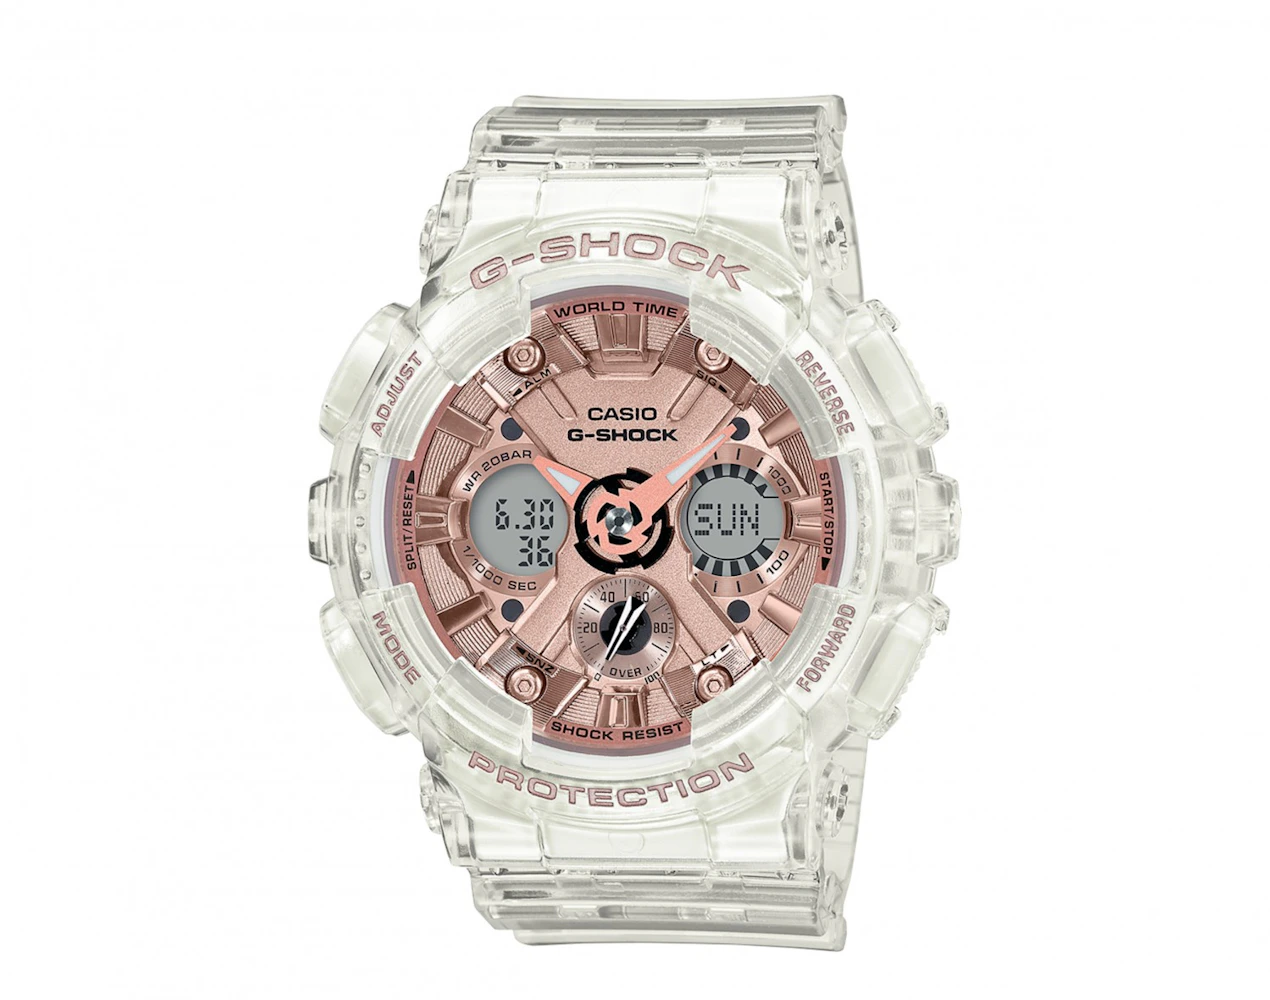 Casio G-Shock GMAS120SR-7A 49mm in Resin - US